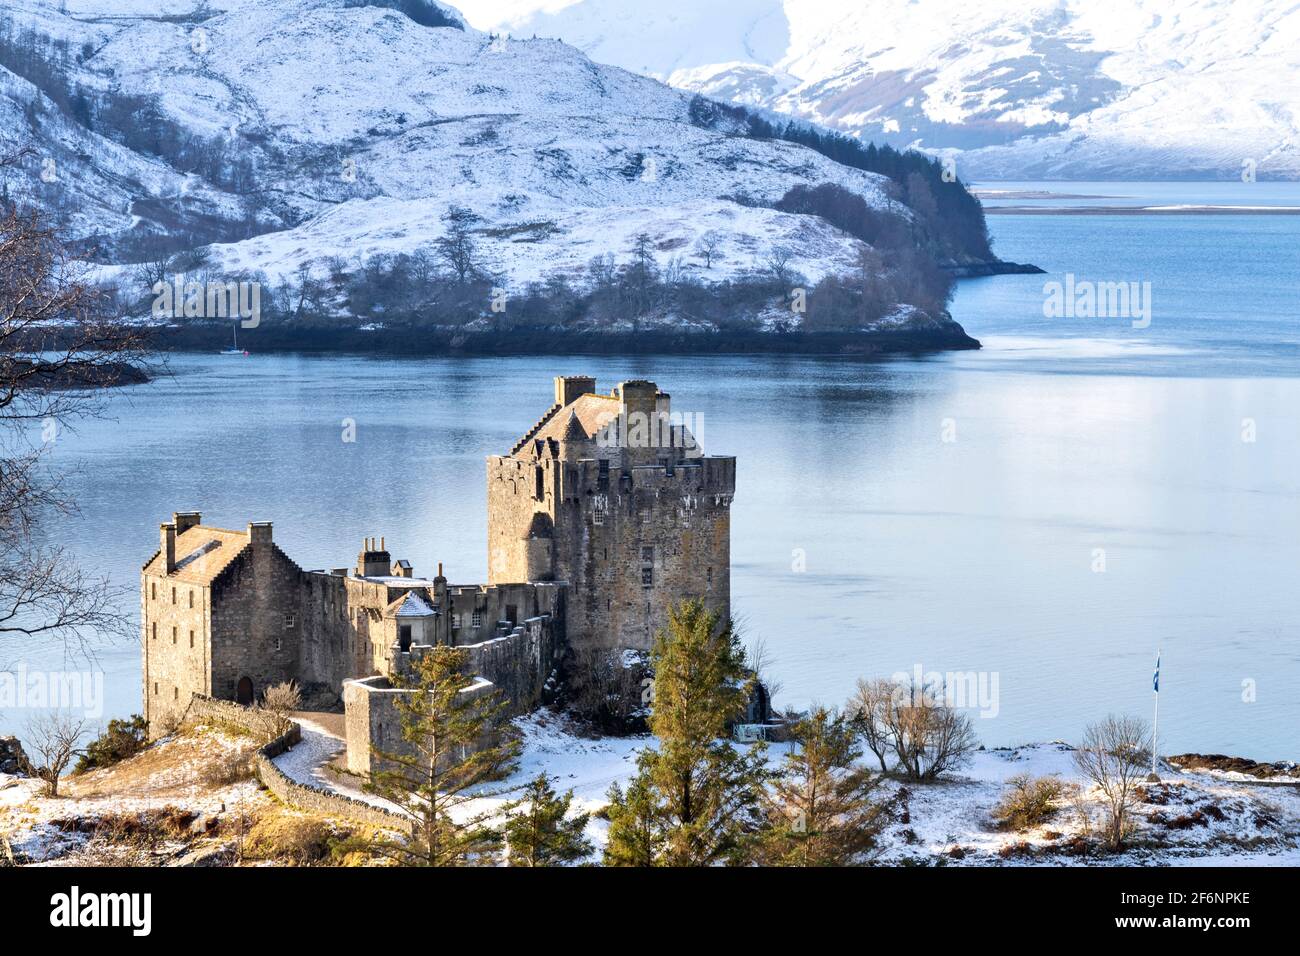 EILEAN DONAN CASTLE LOCH DUICH HIGHLAND SCOTLAND THE CASTLE IN WINTER AND A HEAVY FALL OF SNOW ON THE  HILLS Stock Photo